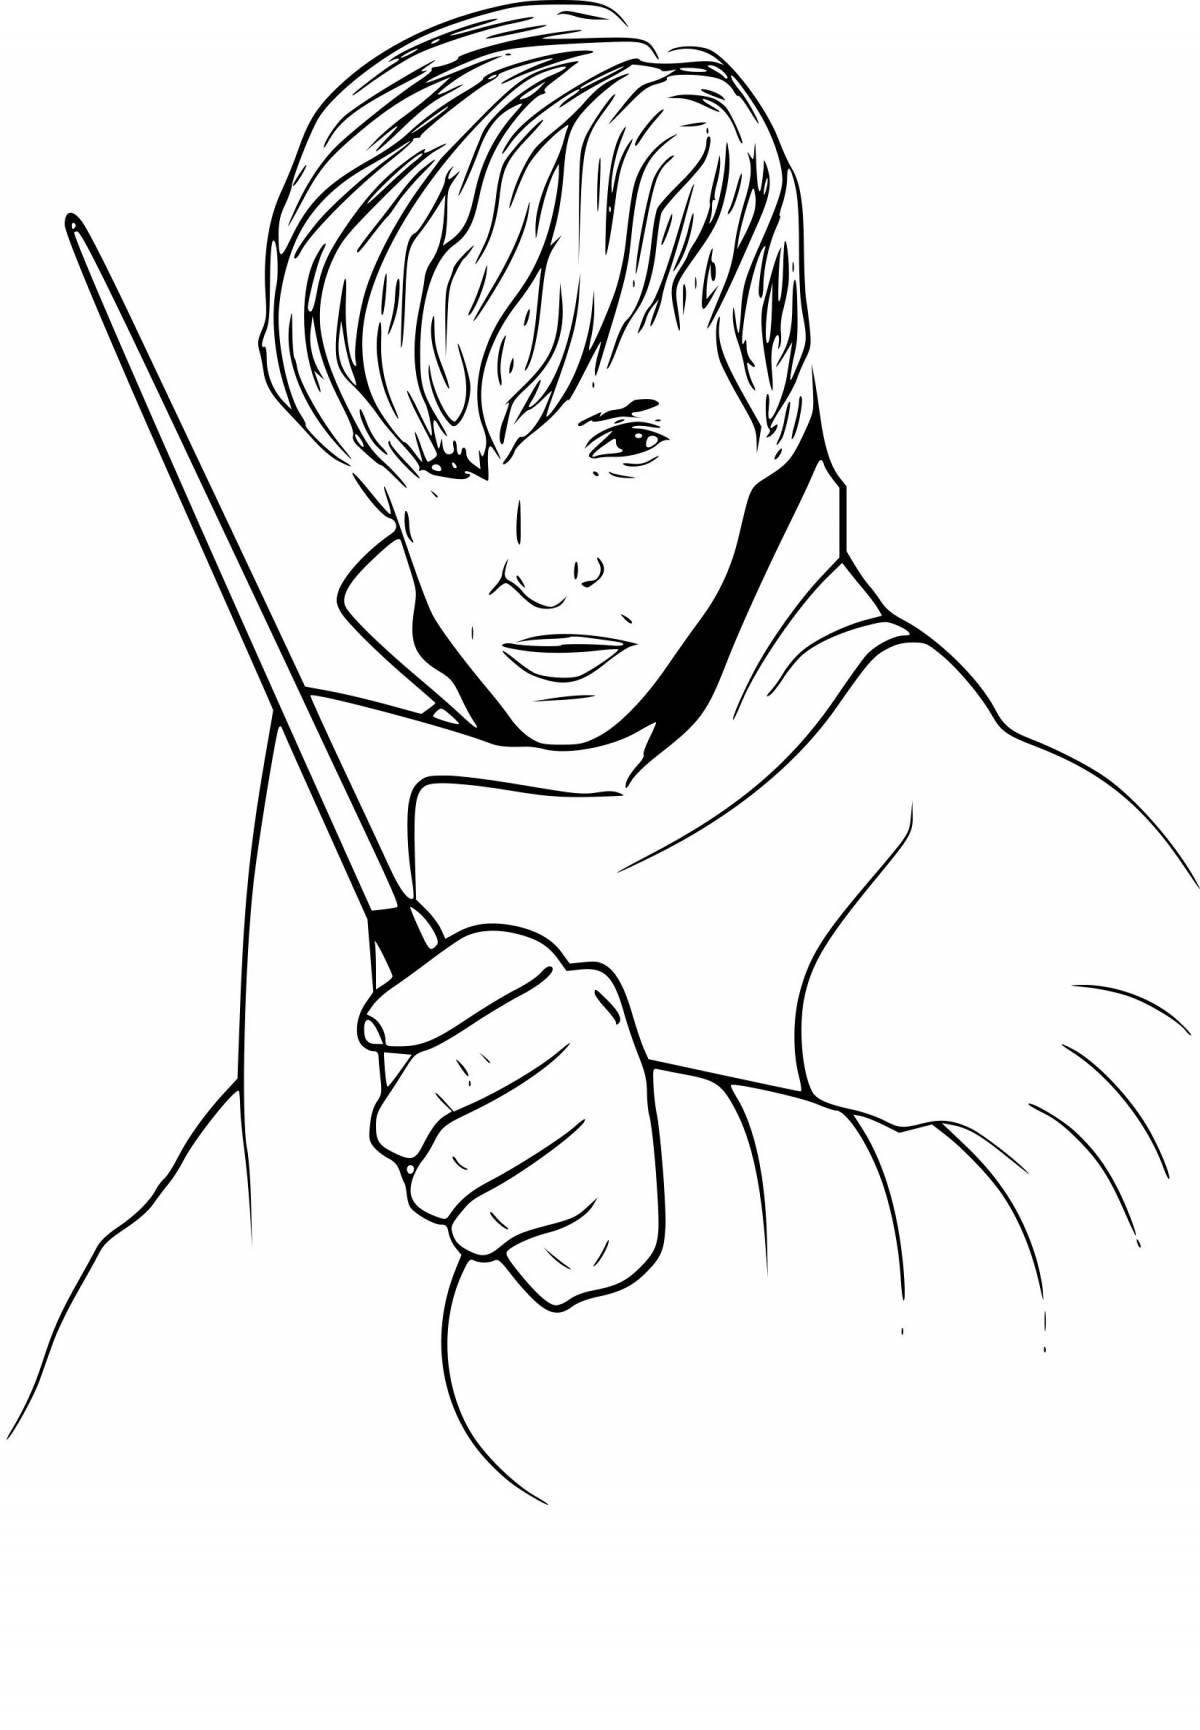 Draco Malfoy's intriguing Harry Potter coloring book